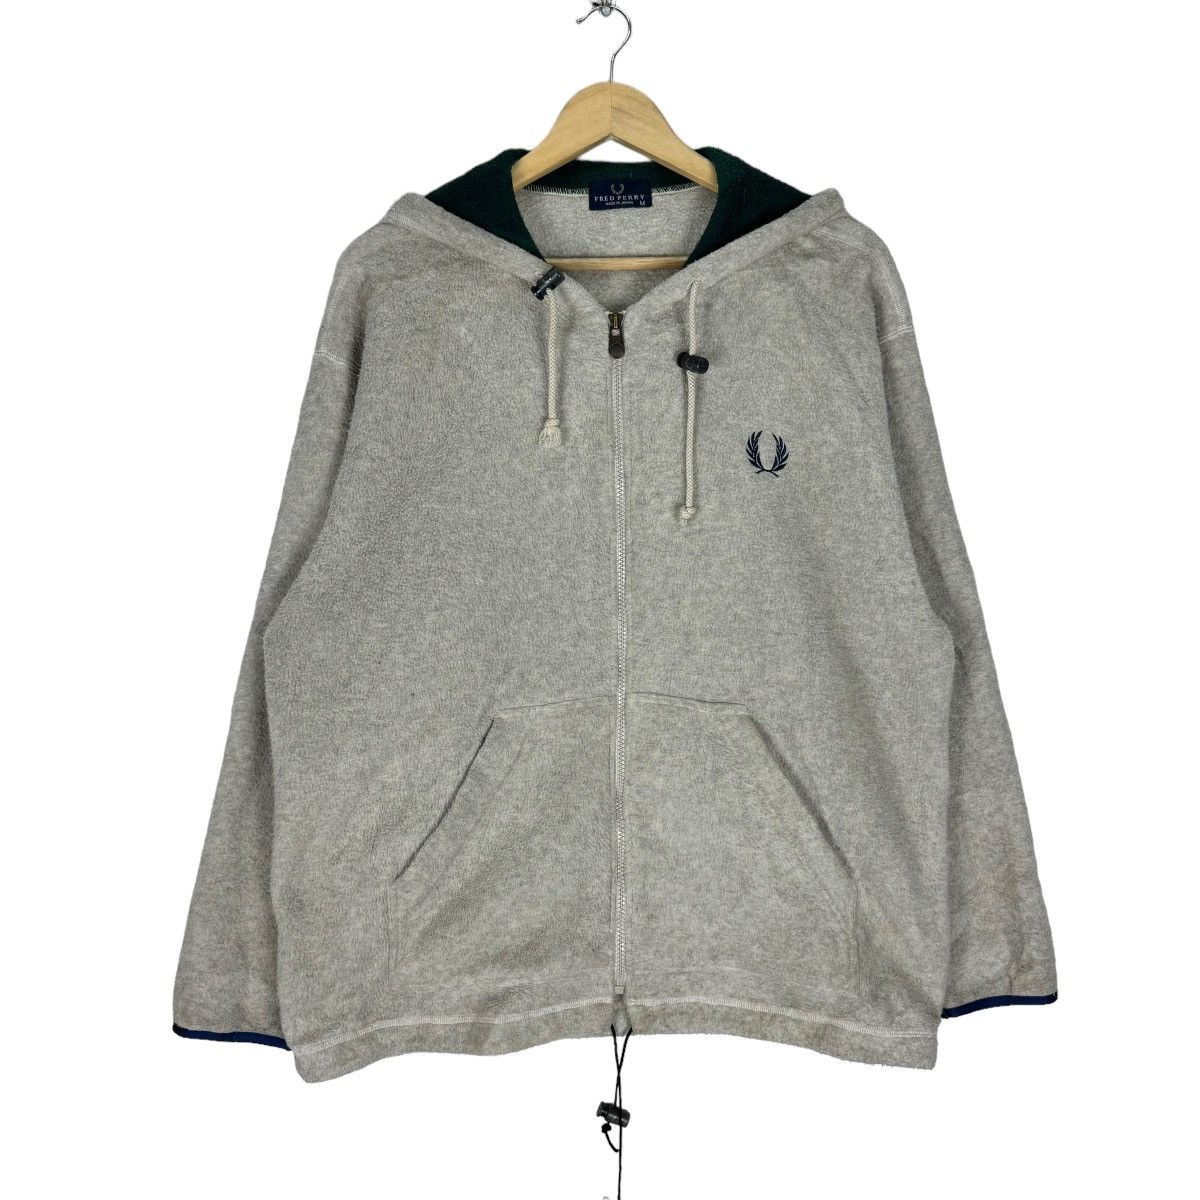 ❄️FRED PERRY HOODIE FLEECE SWEATER - 2